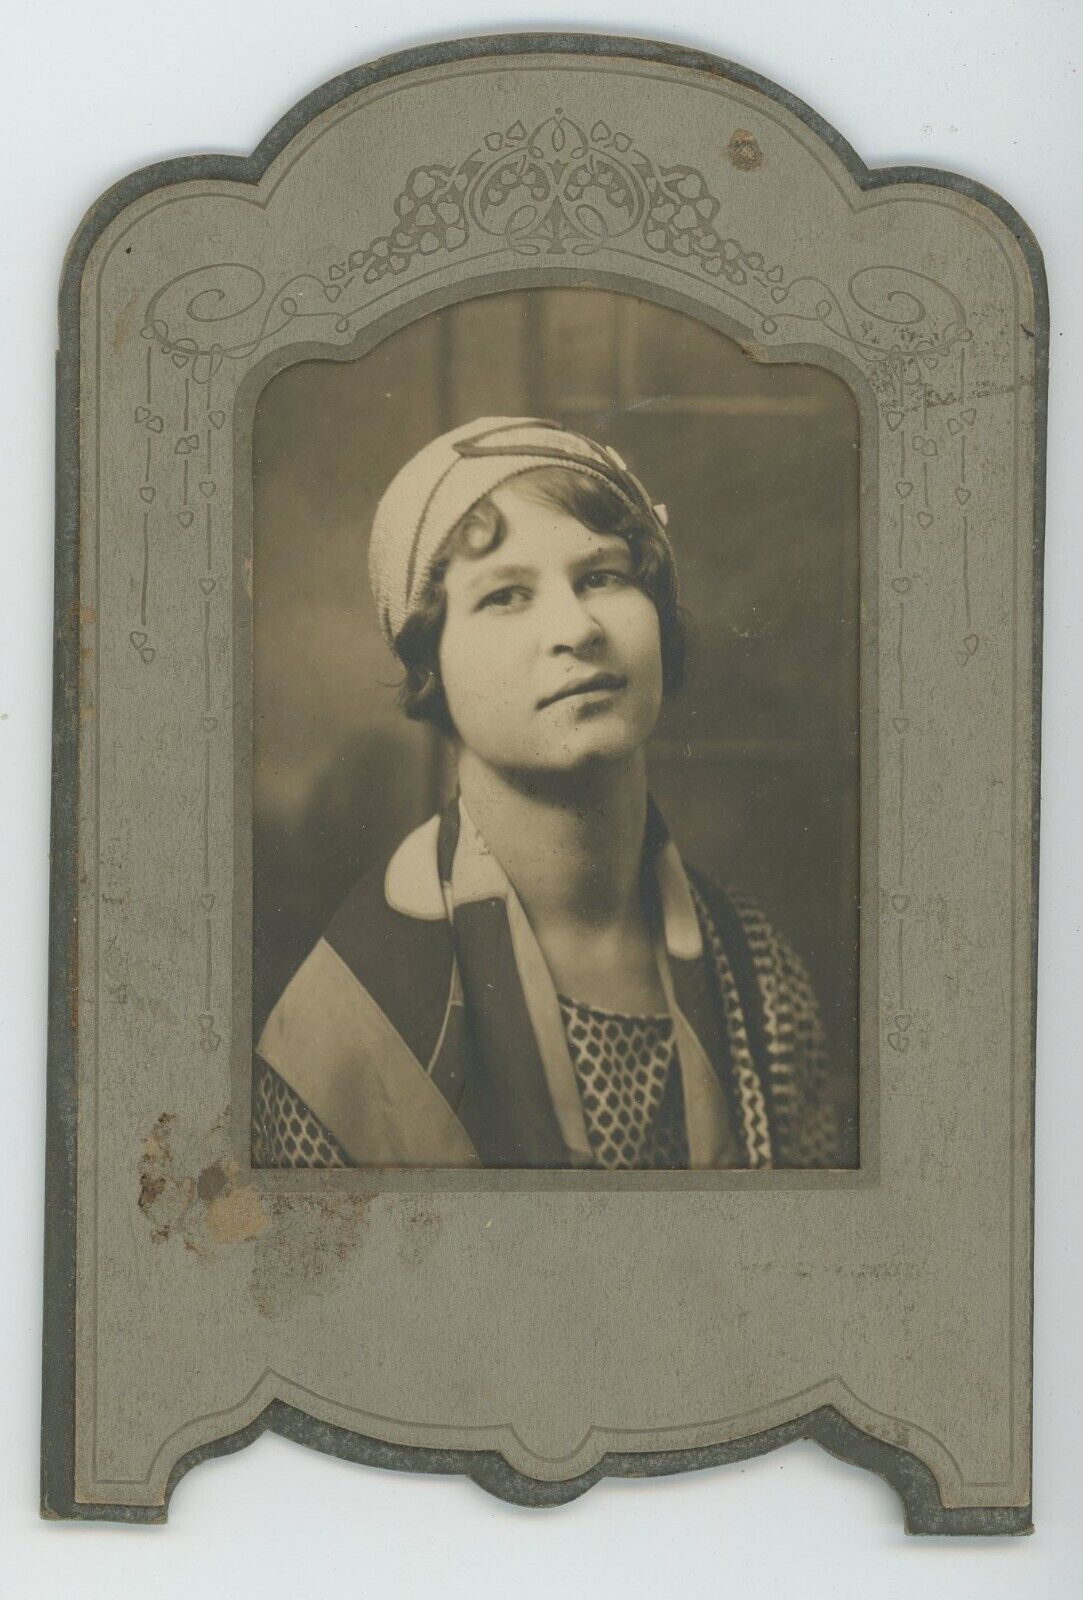 Vintage Studio Photo Masculine Flapper Pin Curls Scarfs Pretty Sultry Girl 1920s